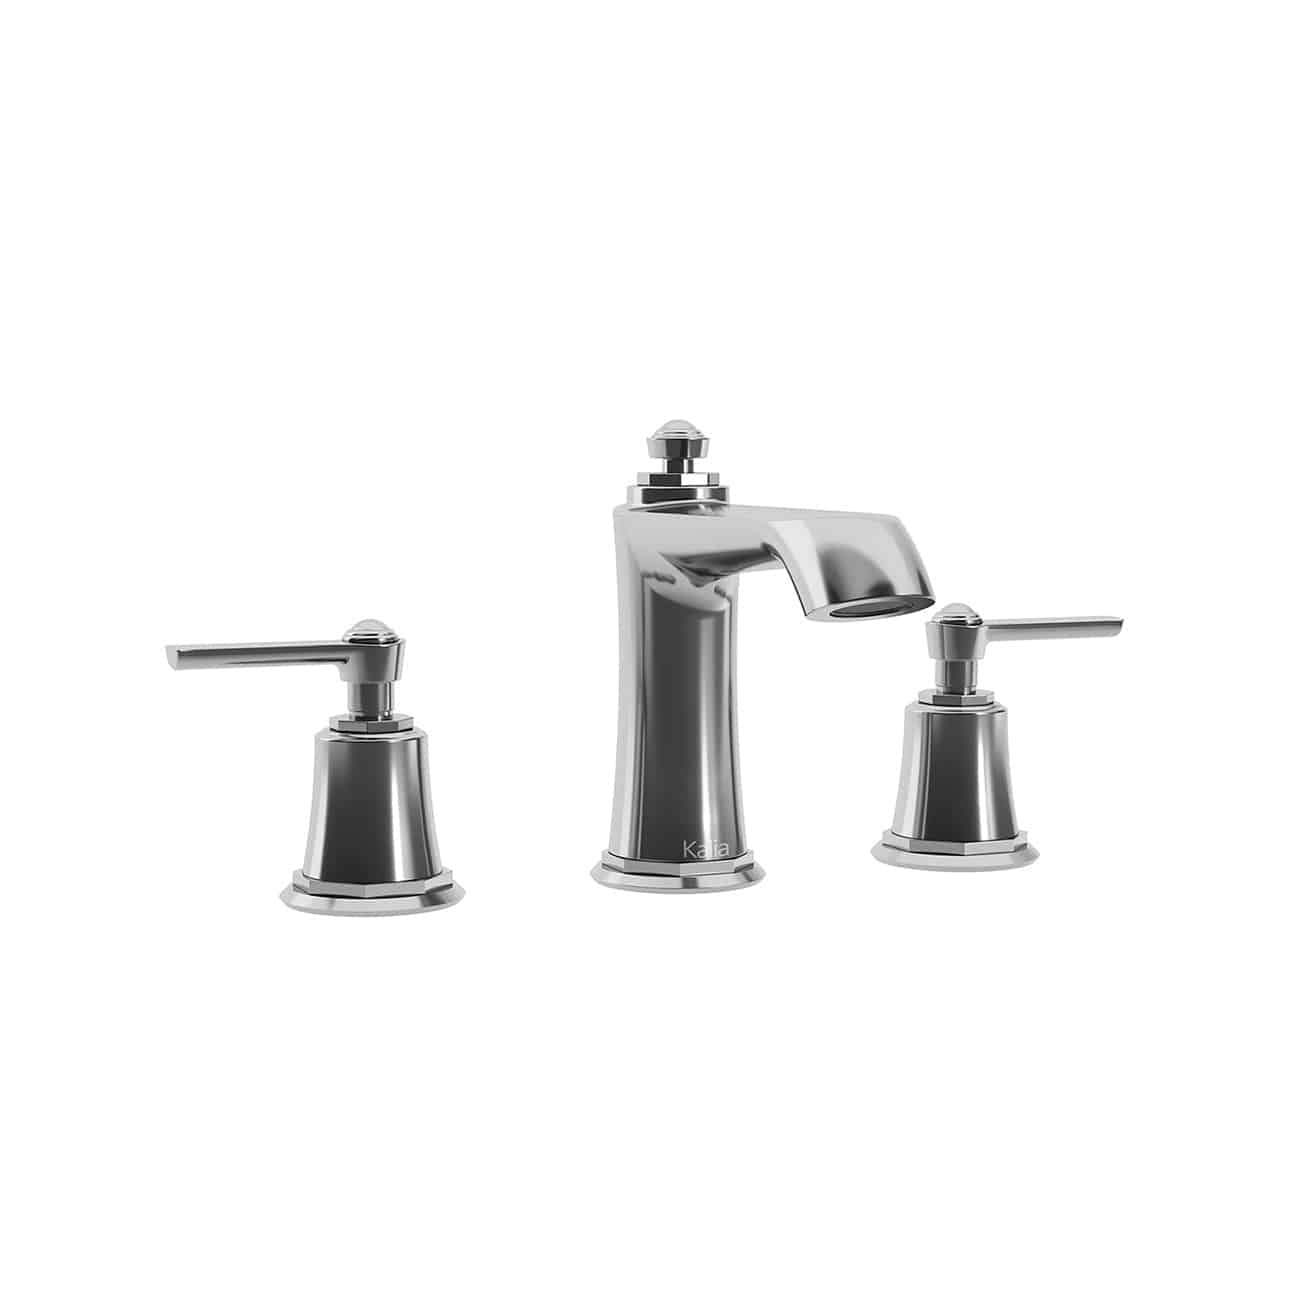 Kalia RUSTIK 5.5" Widespread Lavatory Bathroom Faucet with Pop Up Drain With Overflow -Chrome